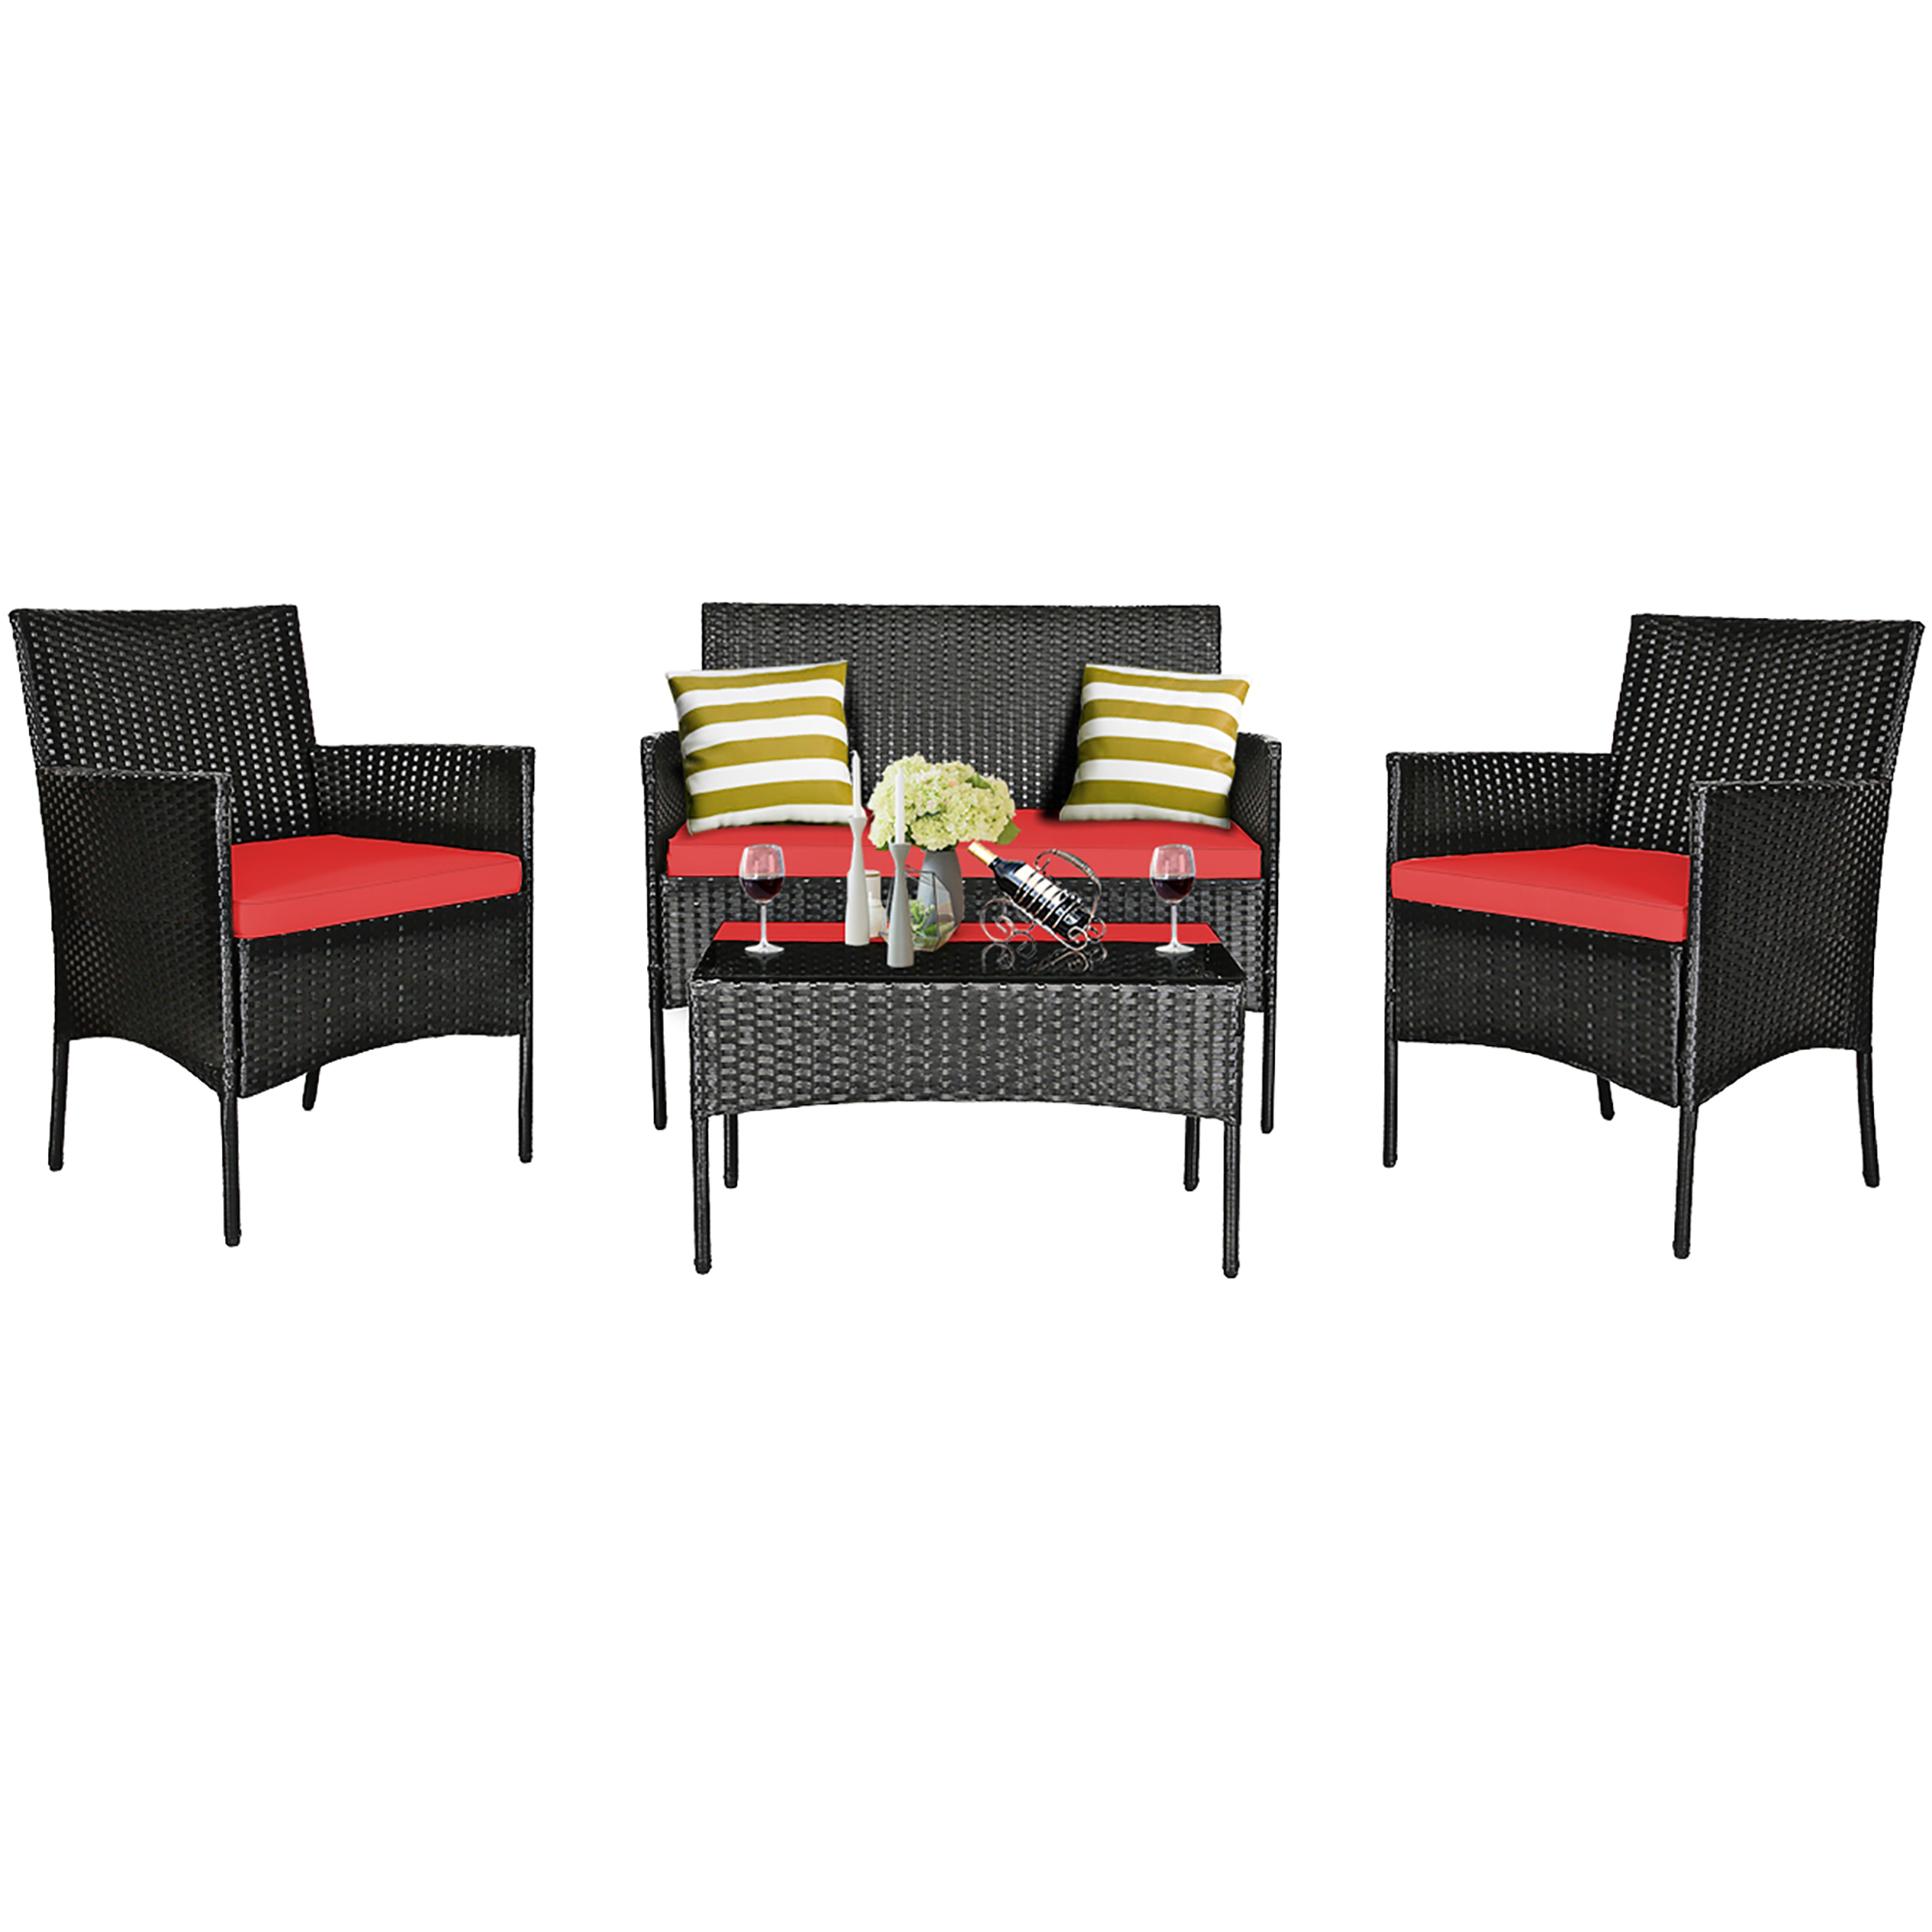 Costway 4PCS Rattan Patio Furniture Set Cushioned Sofa Chair Coffee Table Red - image 8 of 10